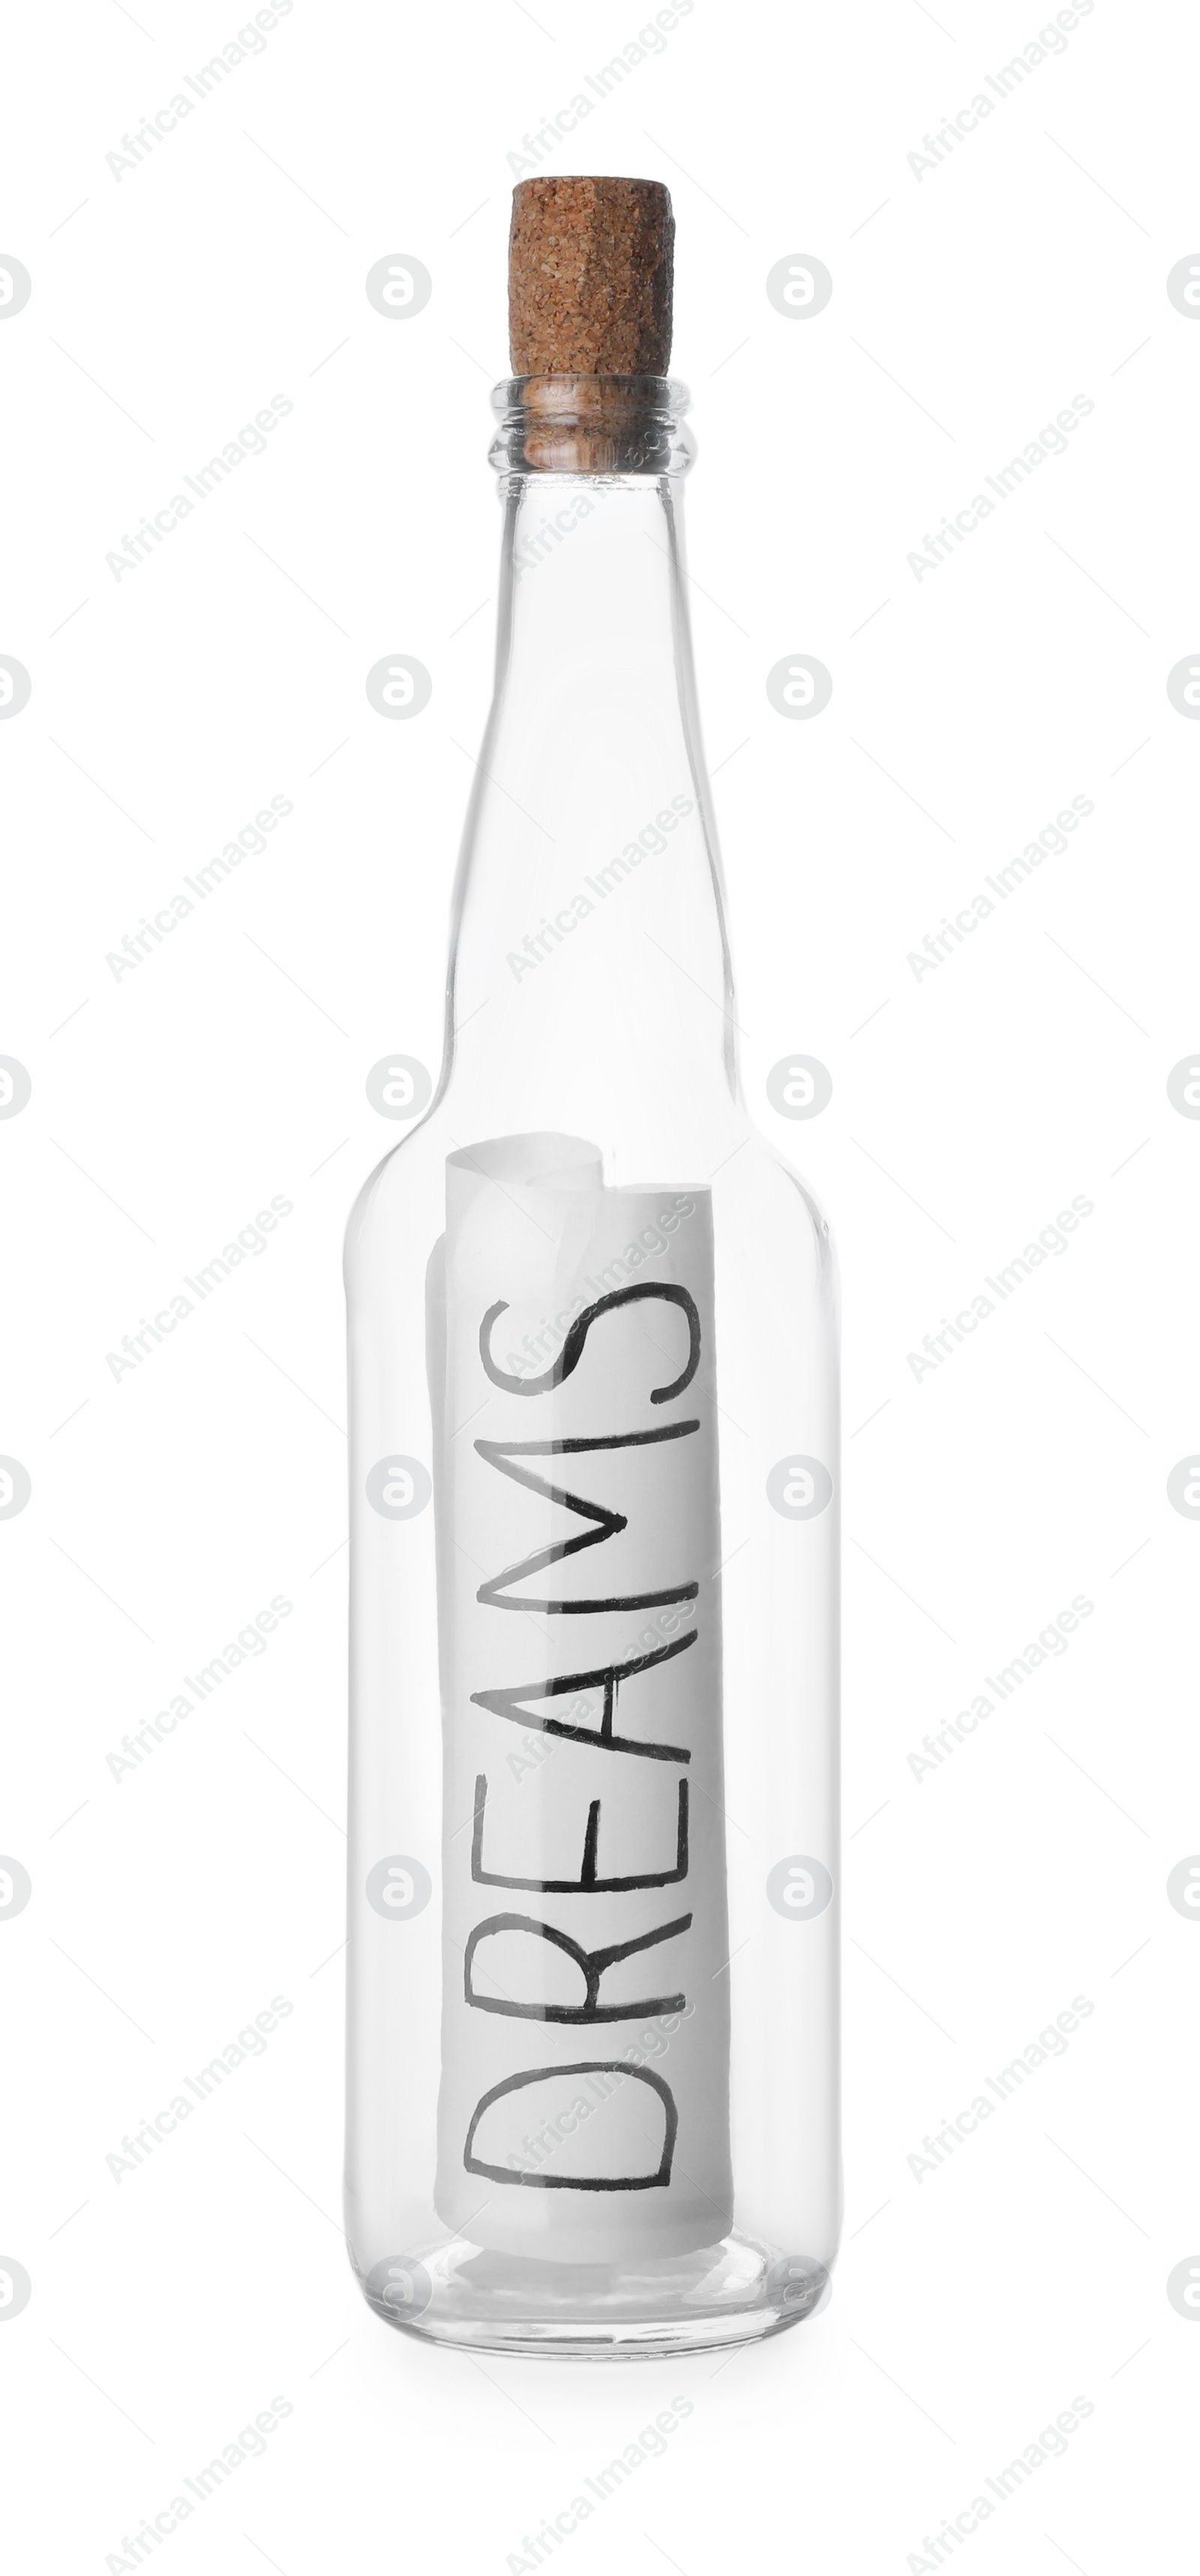 Photo of Corked glass bottle with Dreams note on white background